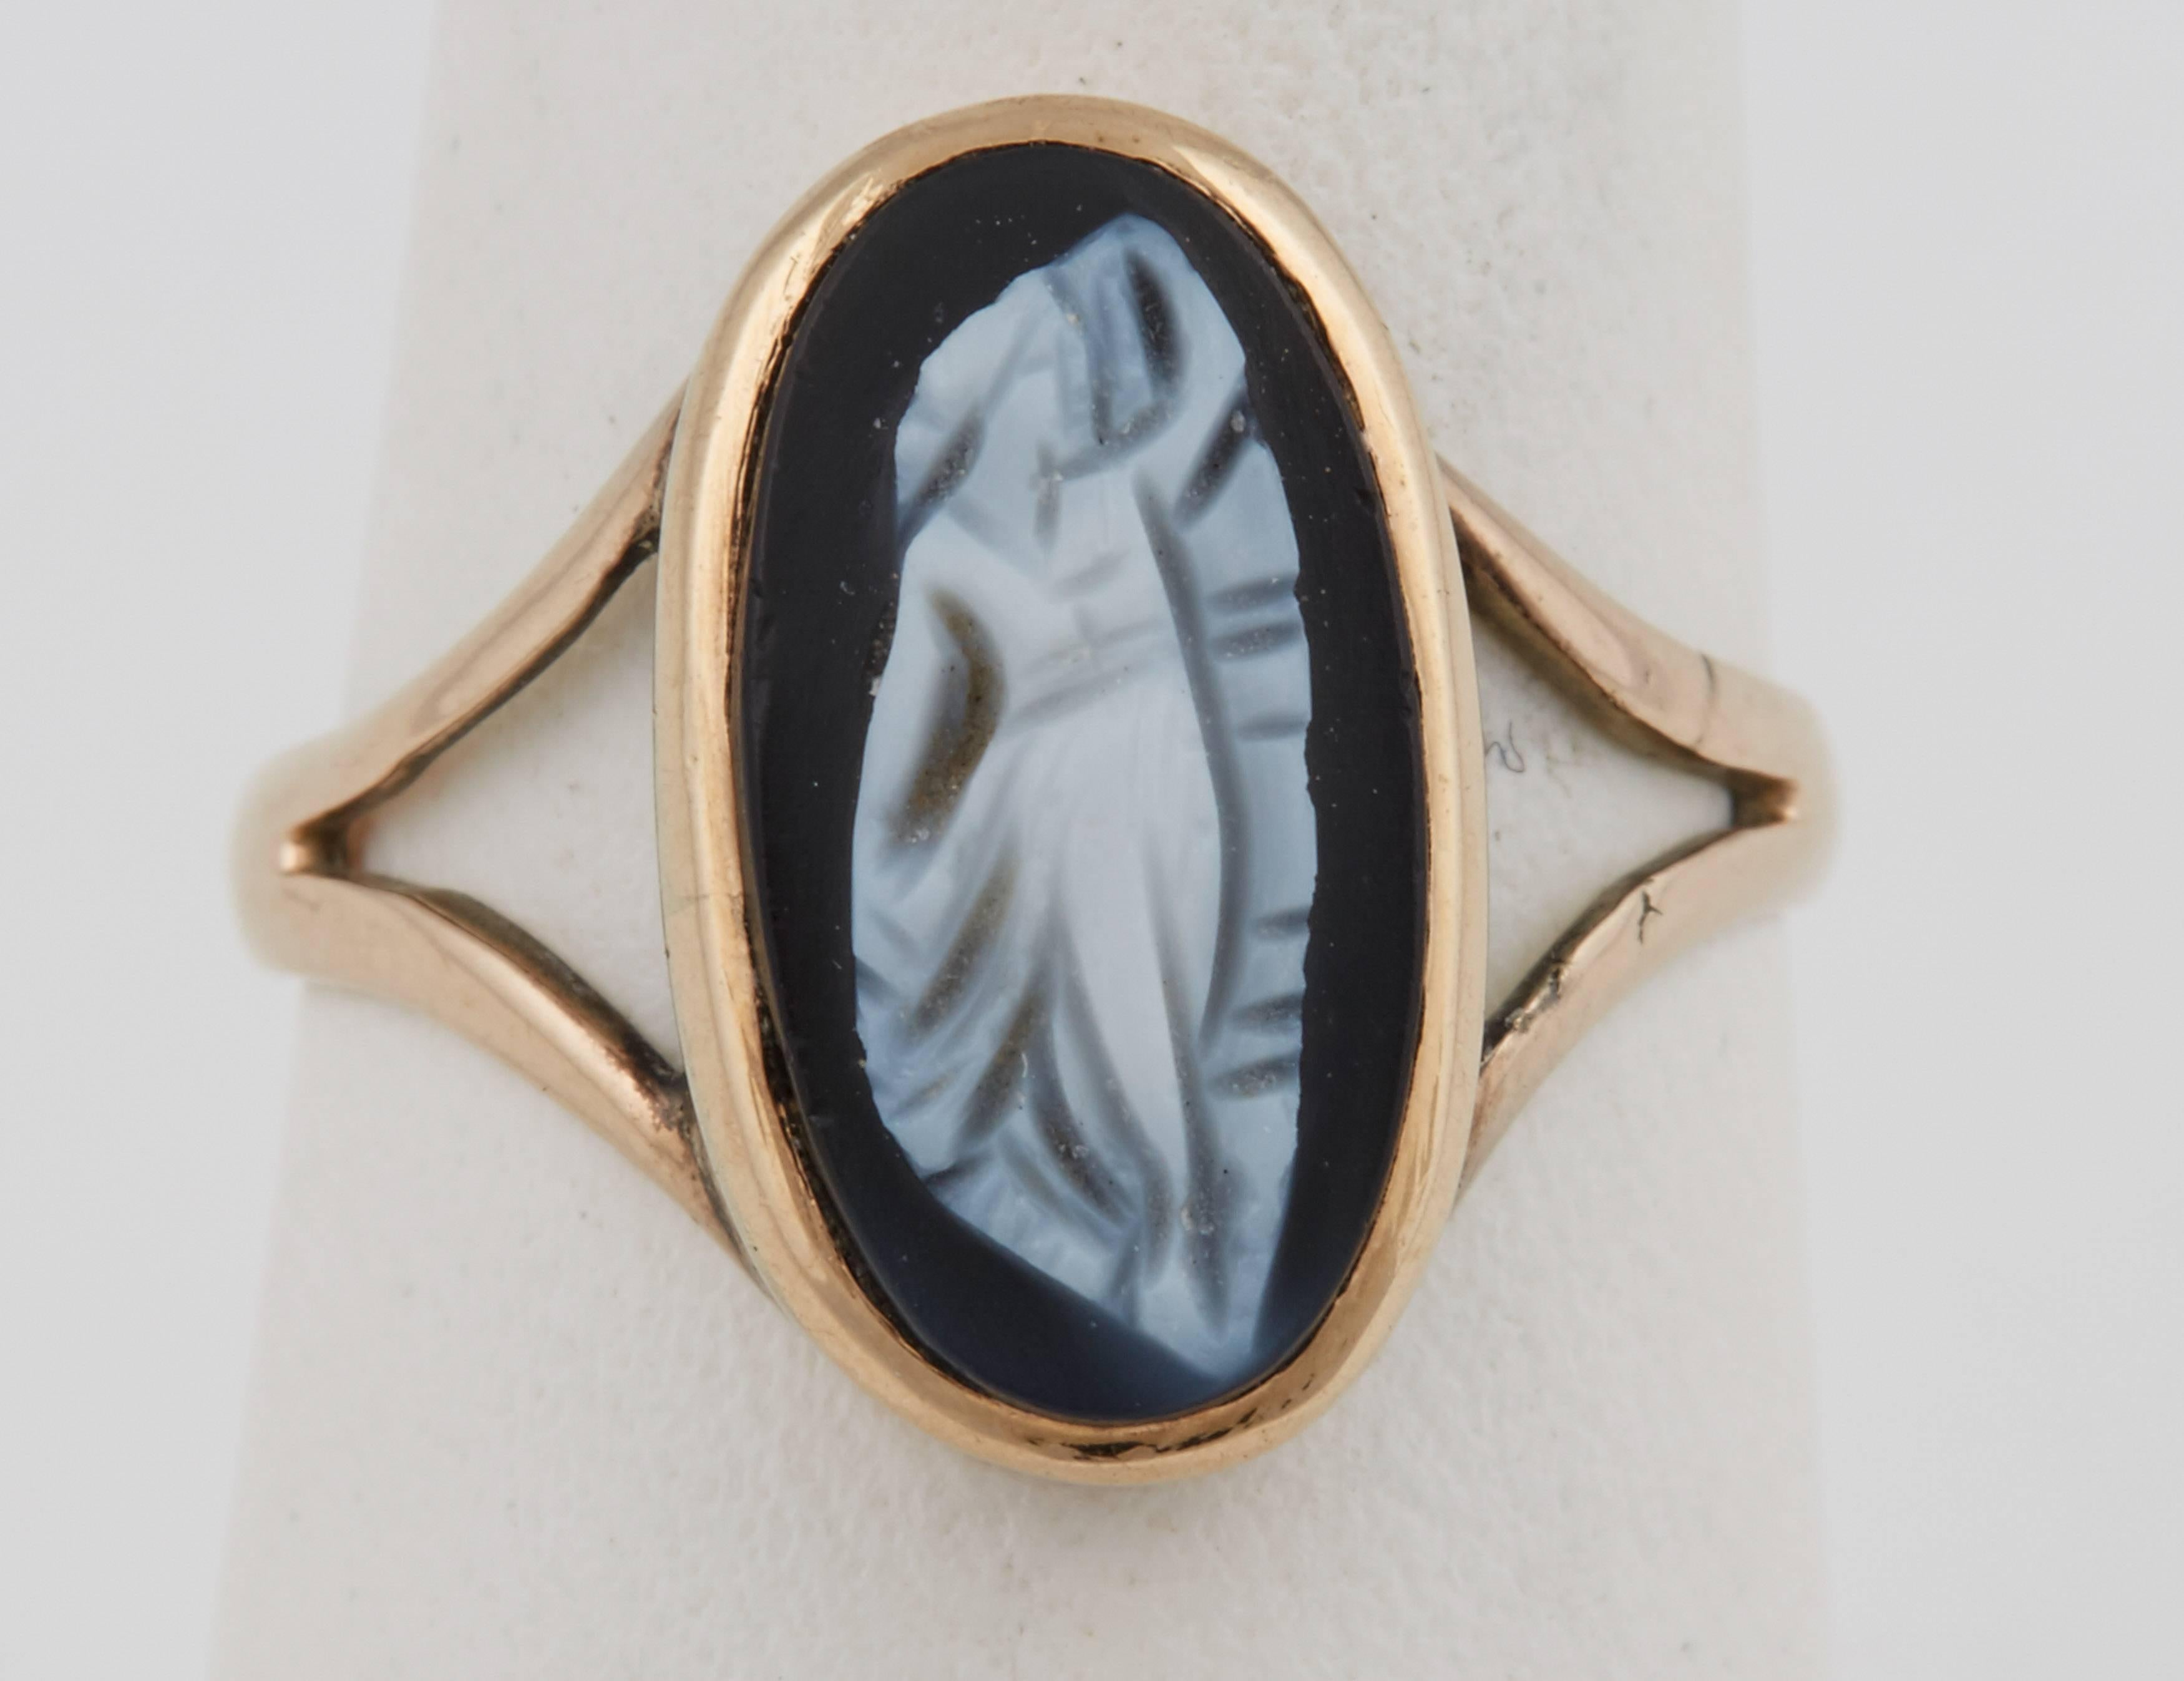 Set with an oval agate cameo of a full-length dancing maiden, in a bezel mount of yellow gold typical of the period.

Mid 19th century, English or American 

Size 4 ½. Cameo 14 x 7 mm bezel set measures 5/8 in. (1.6  cm.) long; 1/8 in, ( .5 cm) high
